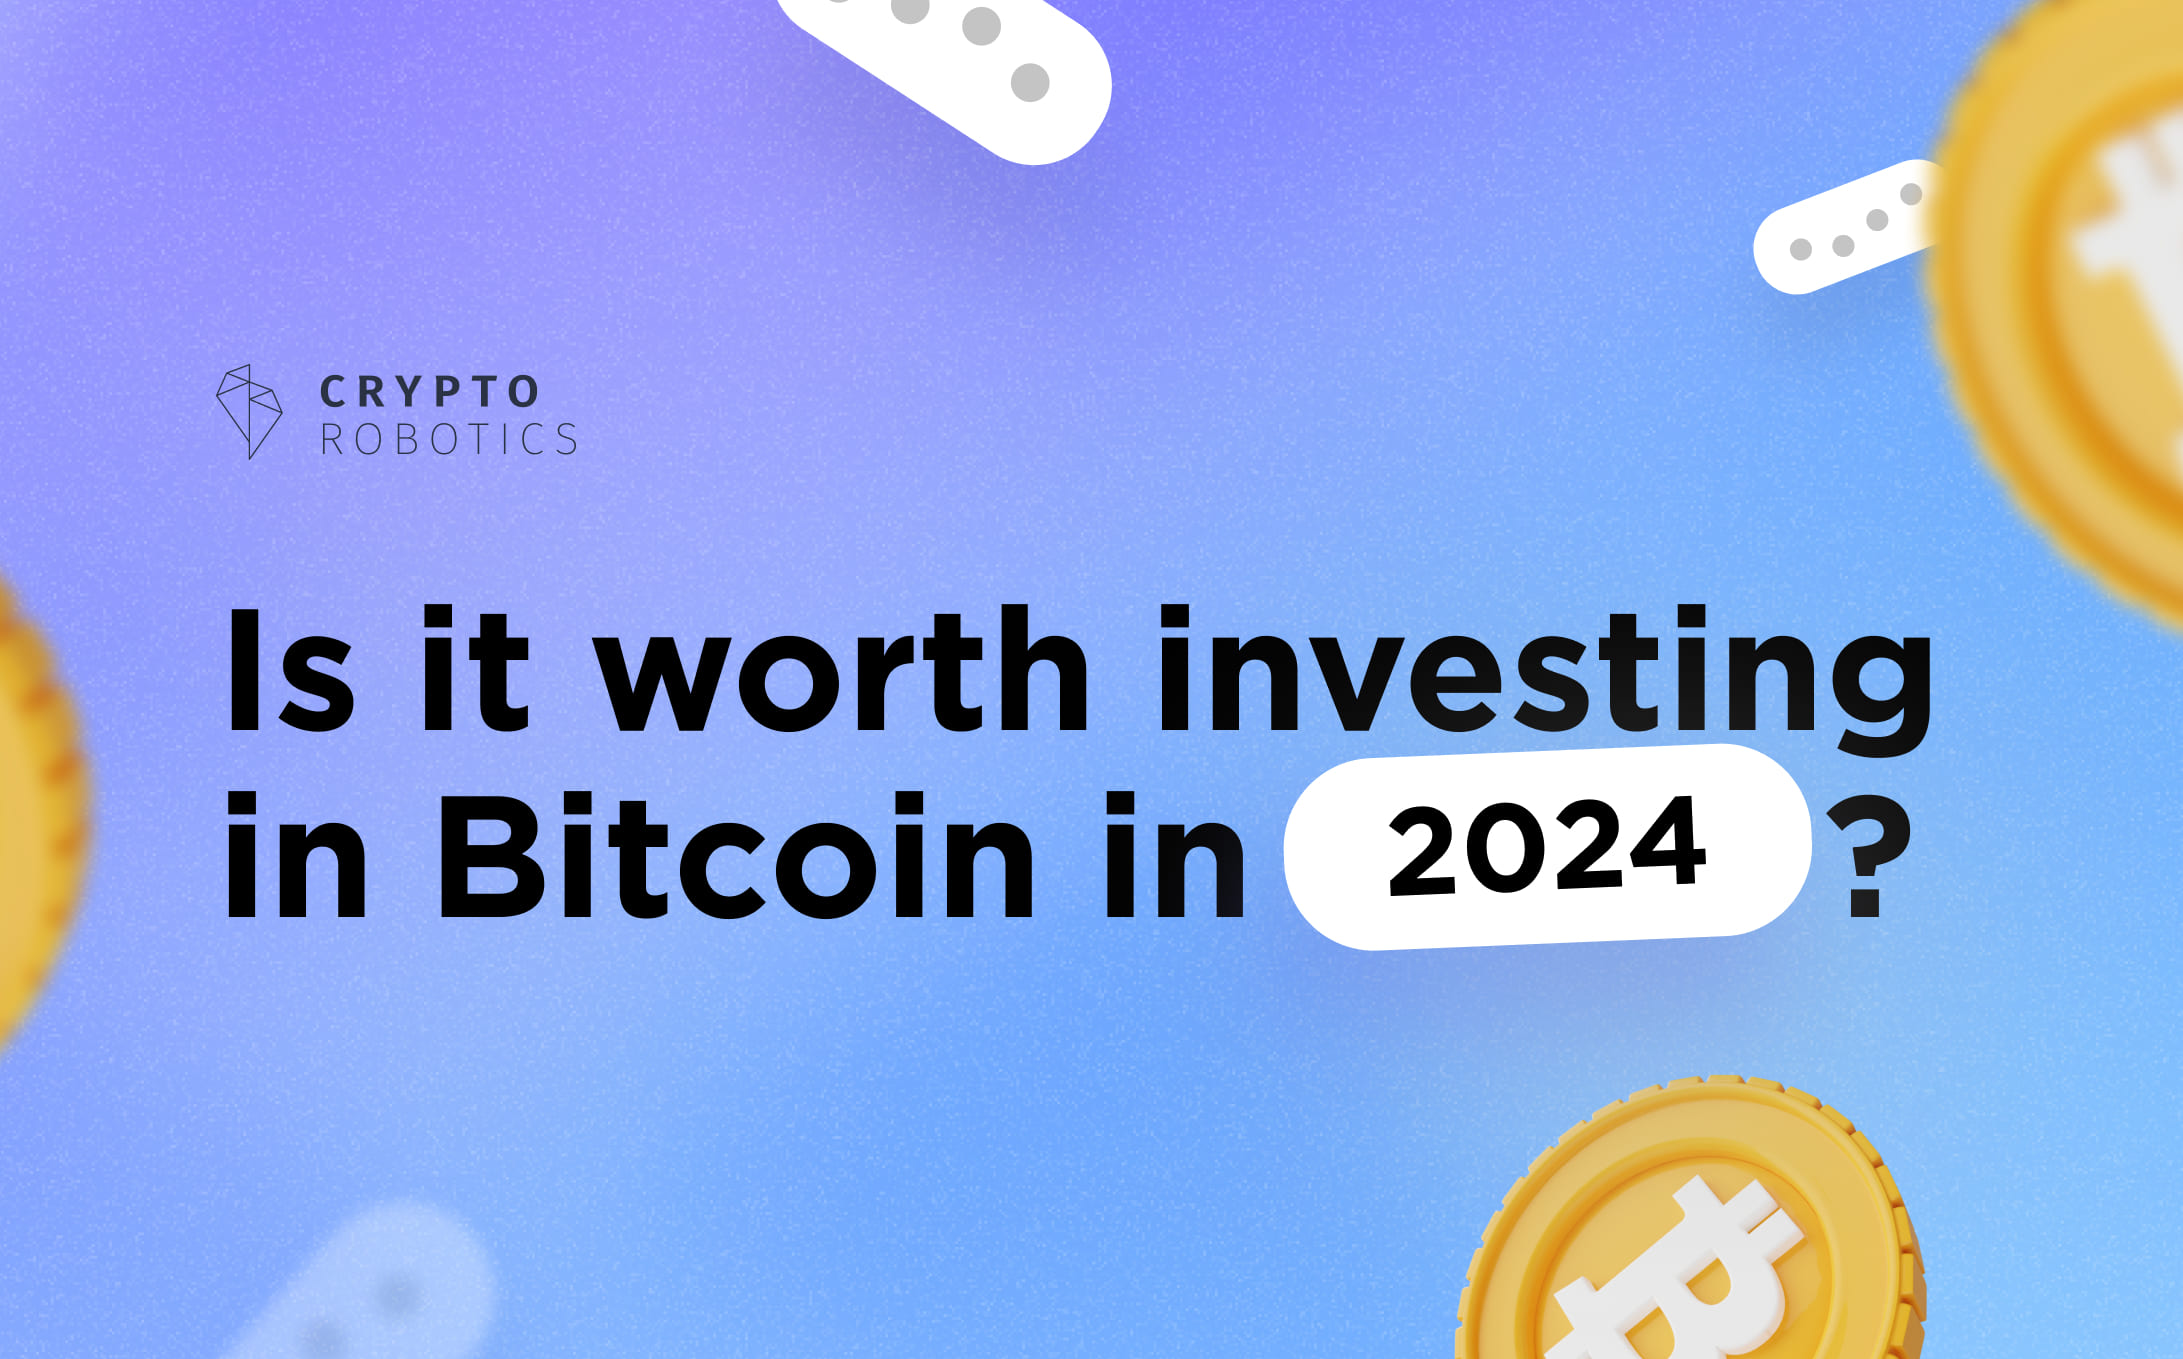 Invest in Bitcoin